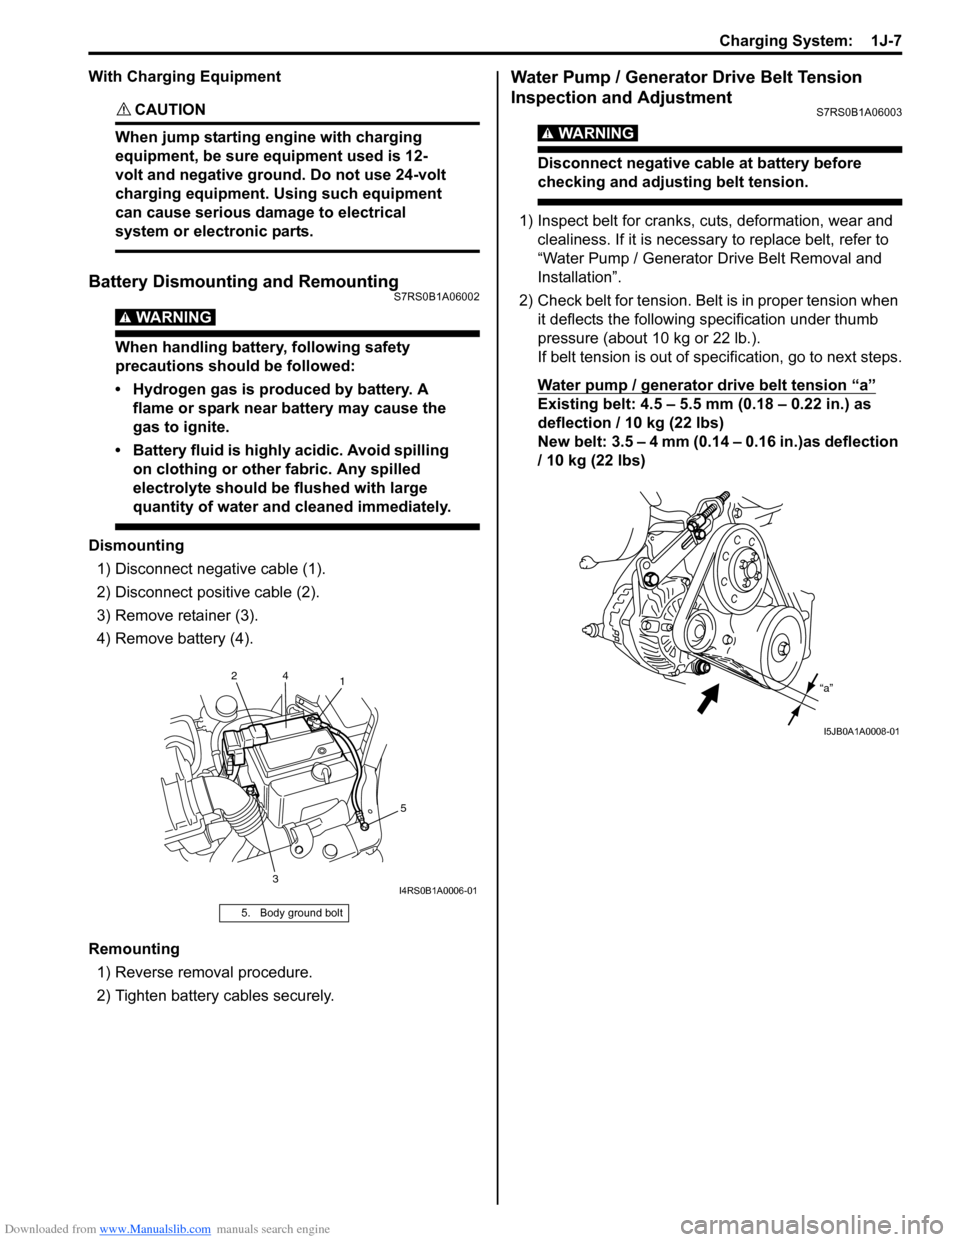 SUZUKI SWIFT 2006 2.G Service Workshop Manual Downloaded from www.Manualslib.com manuals search engine Charging System:  1J-7
With Charging Equipment
CAUTION! 
When jump starting engine with charging 
equipment, be sure equipment used is 12-
volt